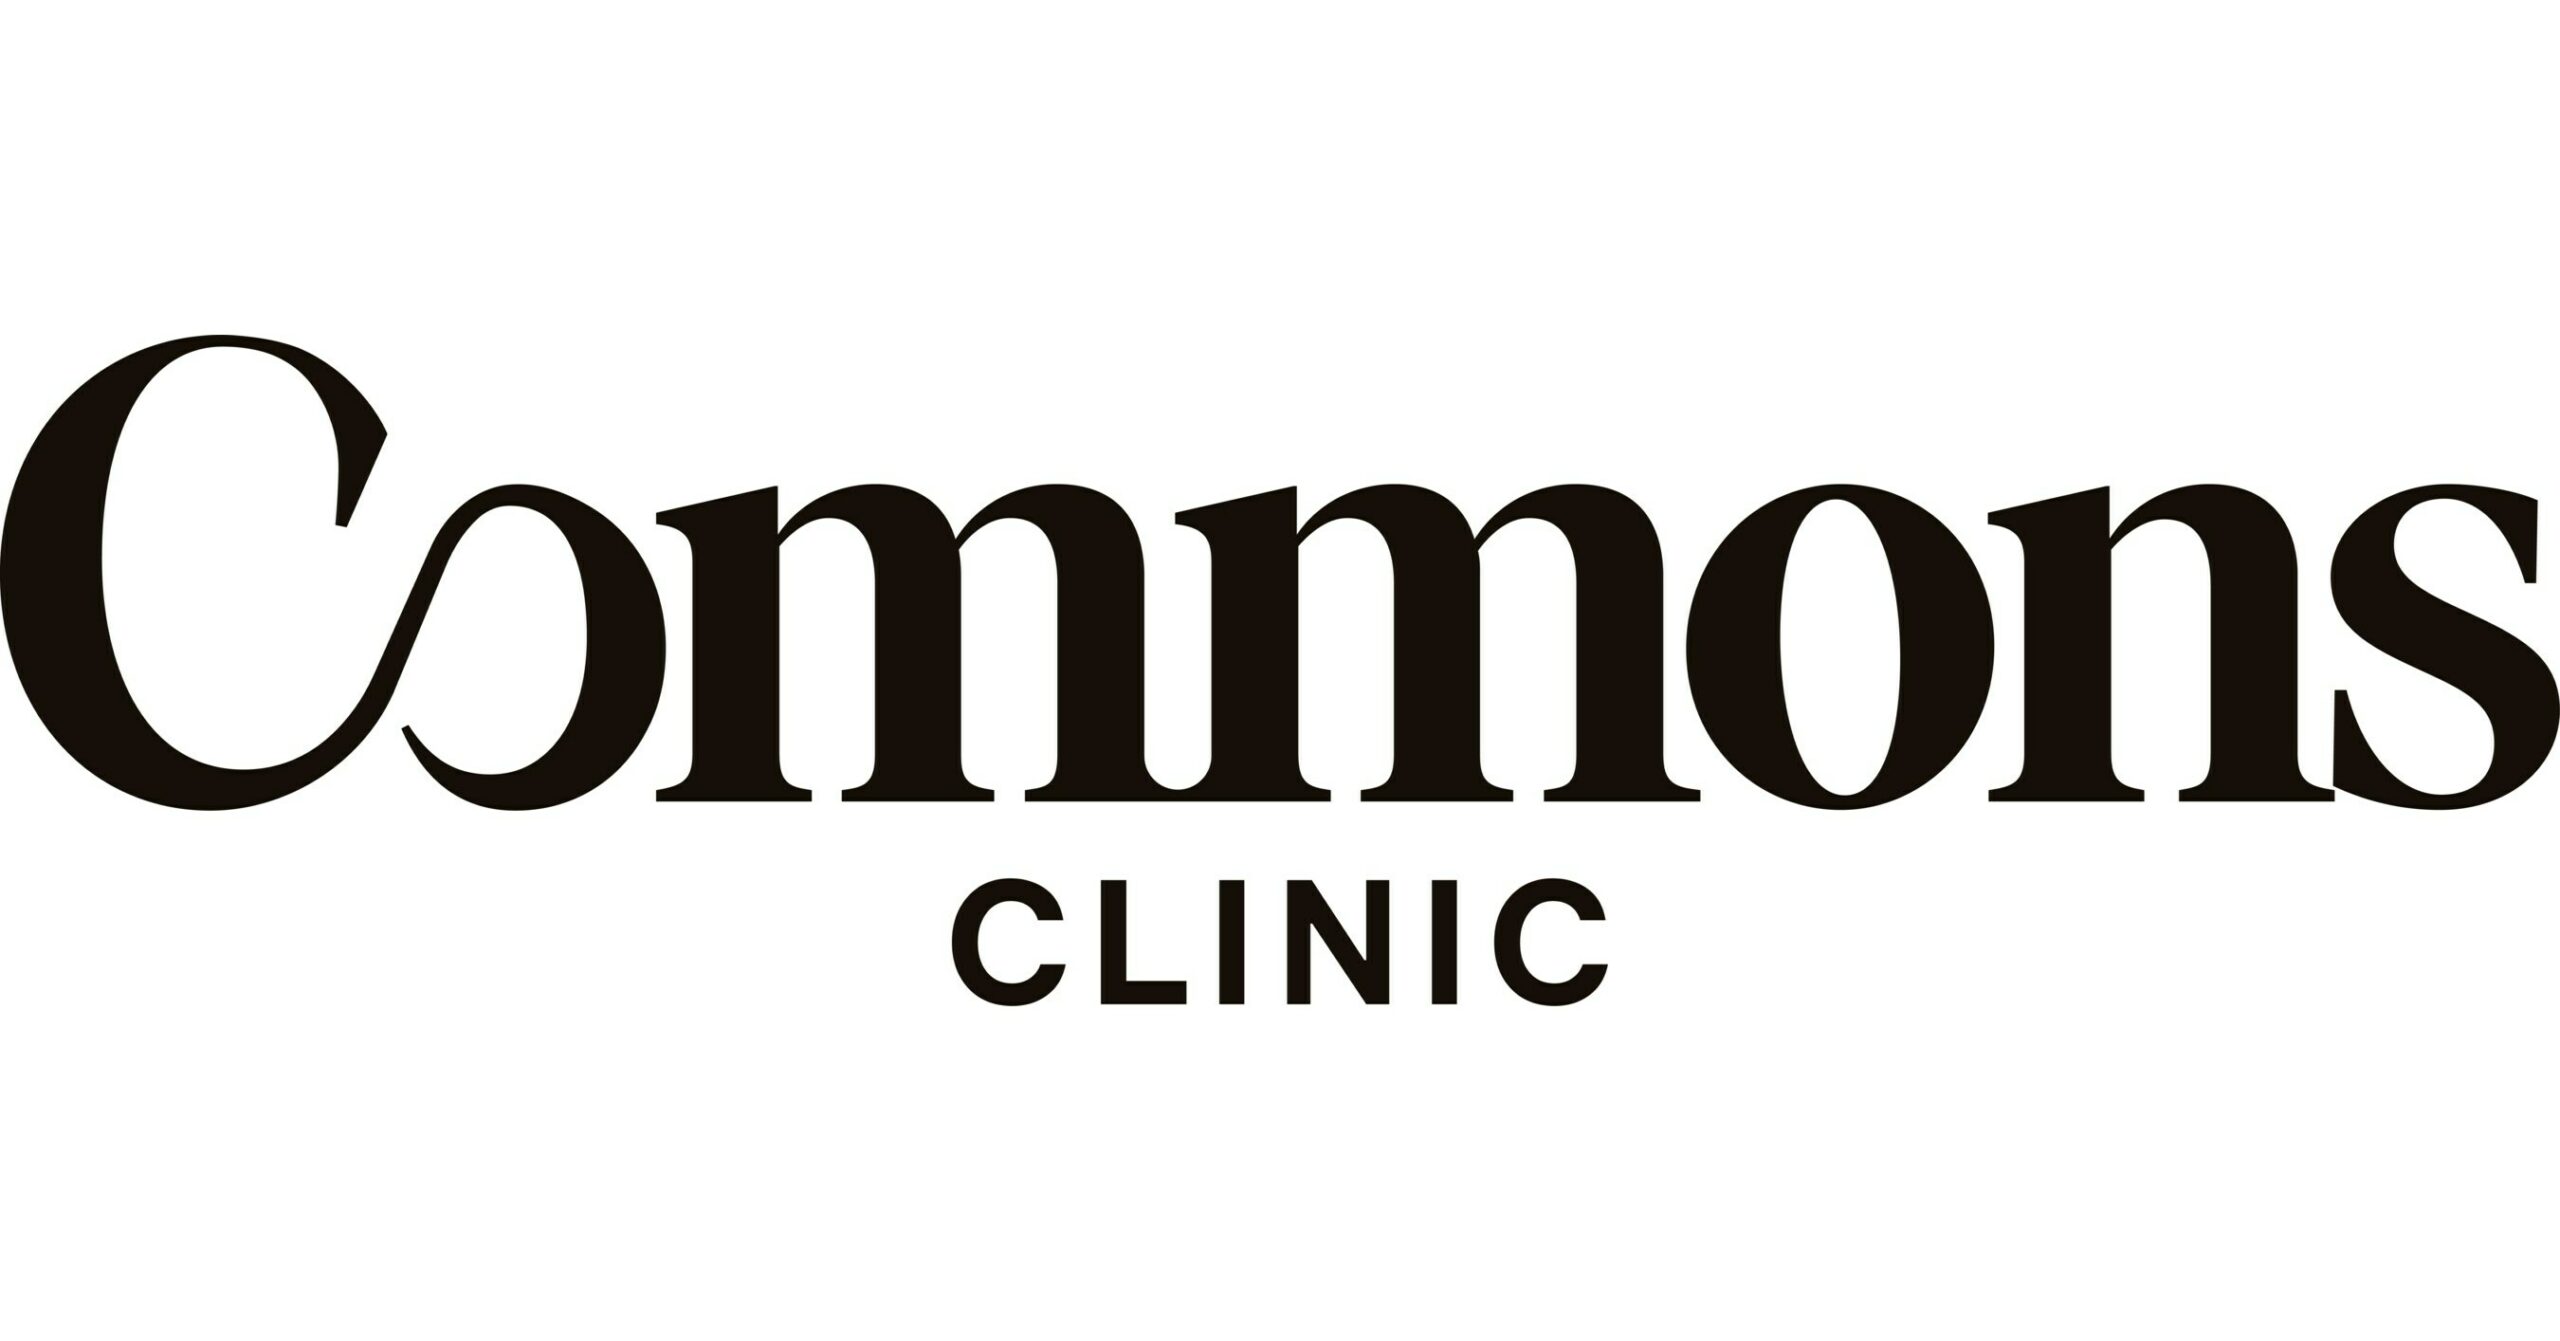 Commons Clinic Secures $19.5M for VBC Model for Spinal Care, Orthopedics, and Pain Management